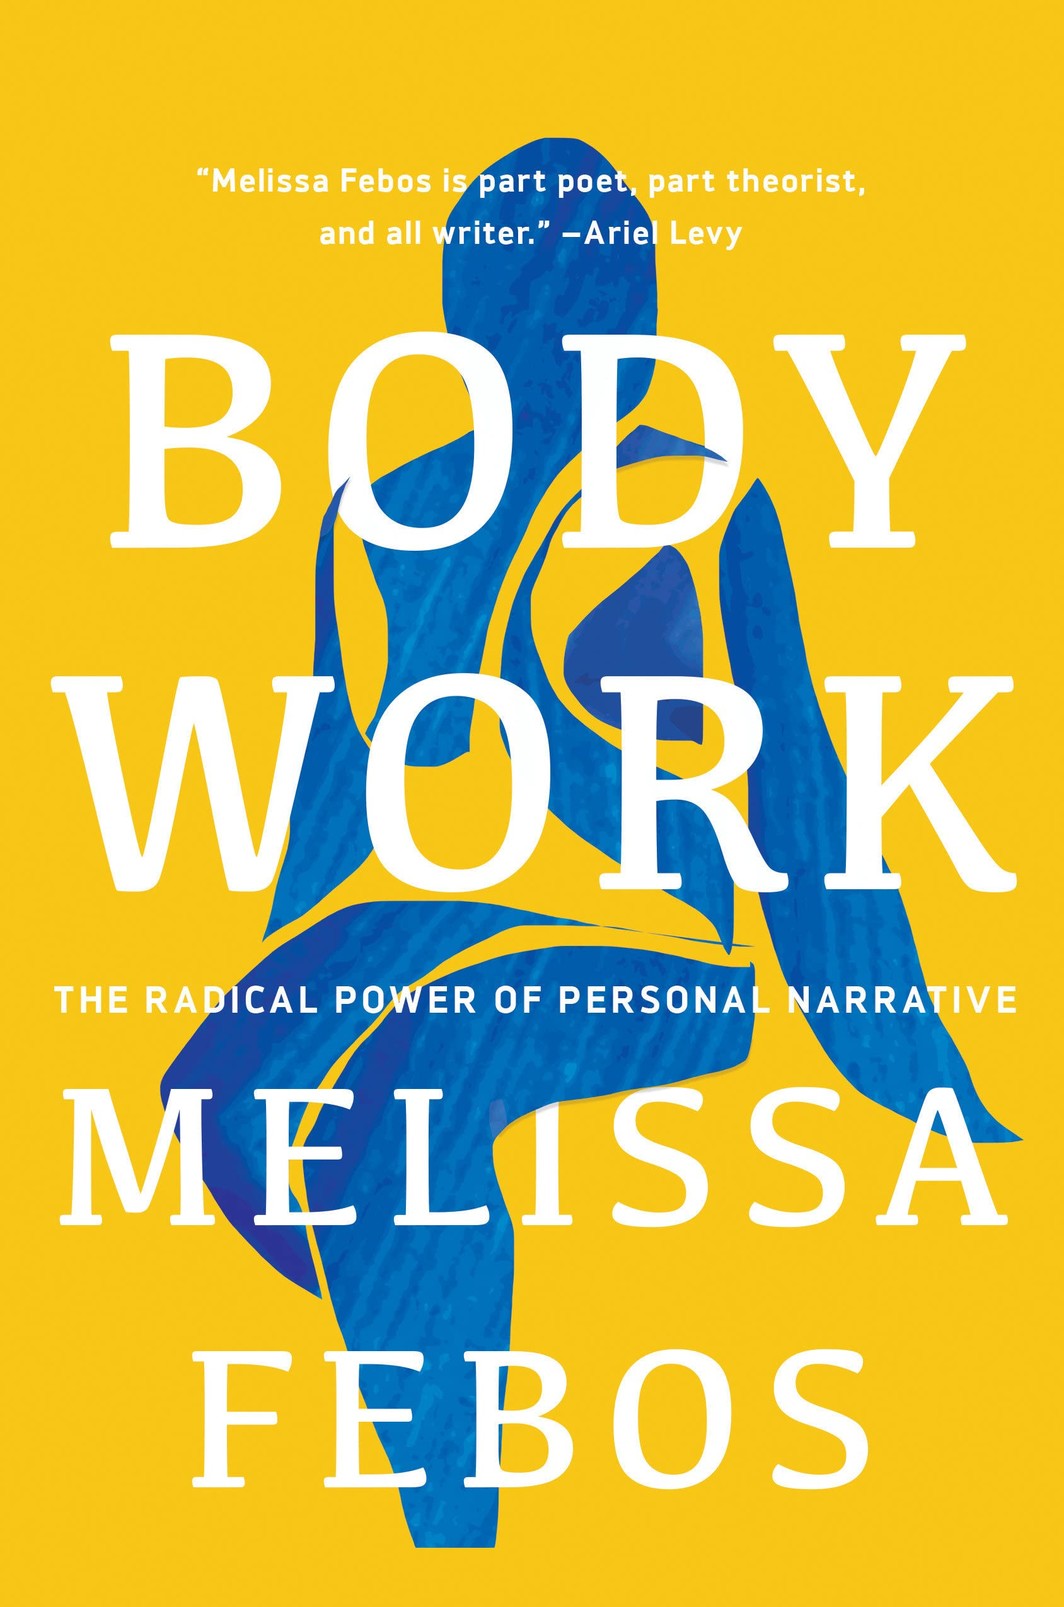 The cover of Body Work: The Radical Power of Personal Narrative